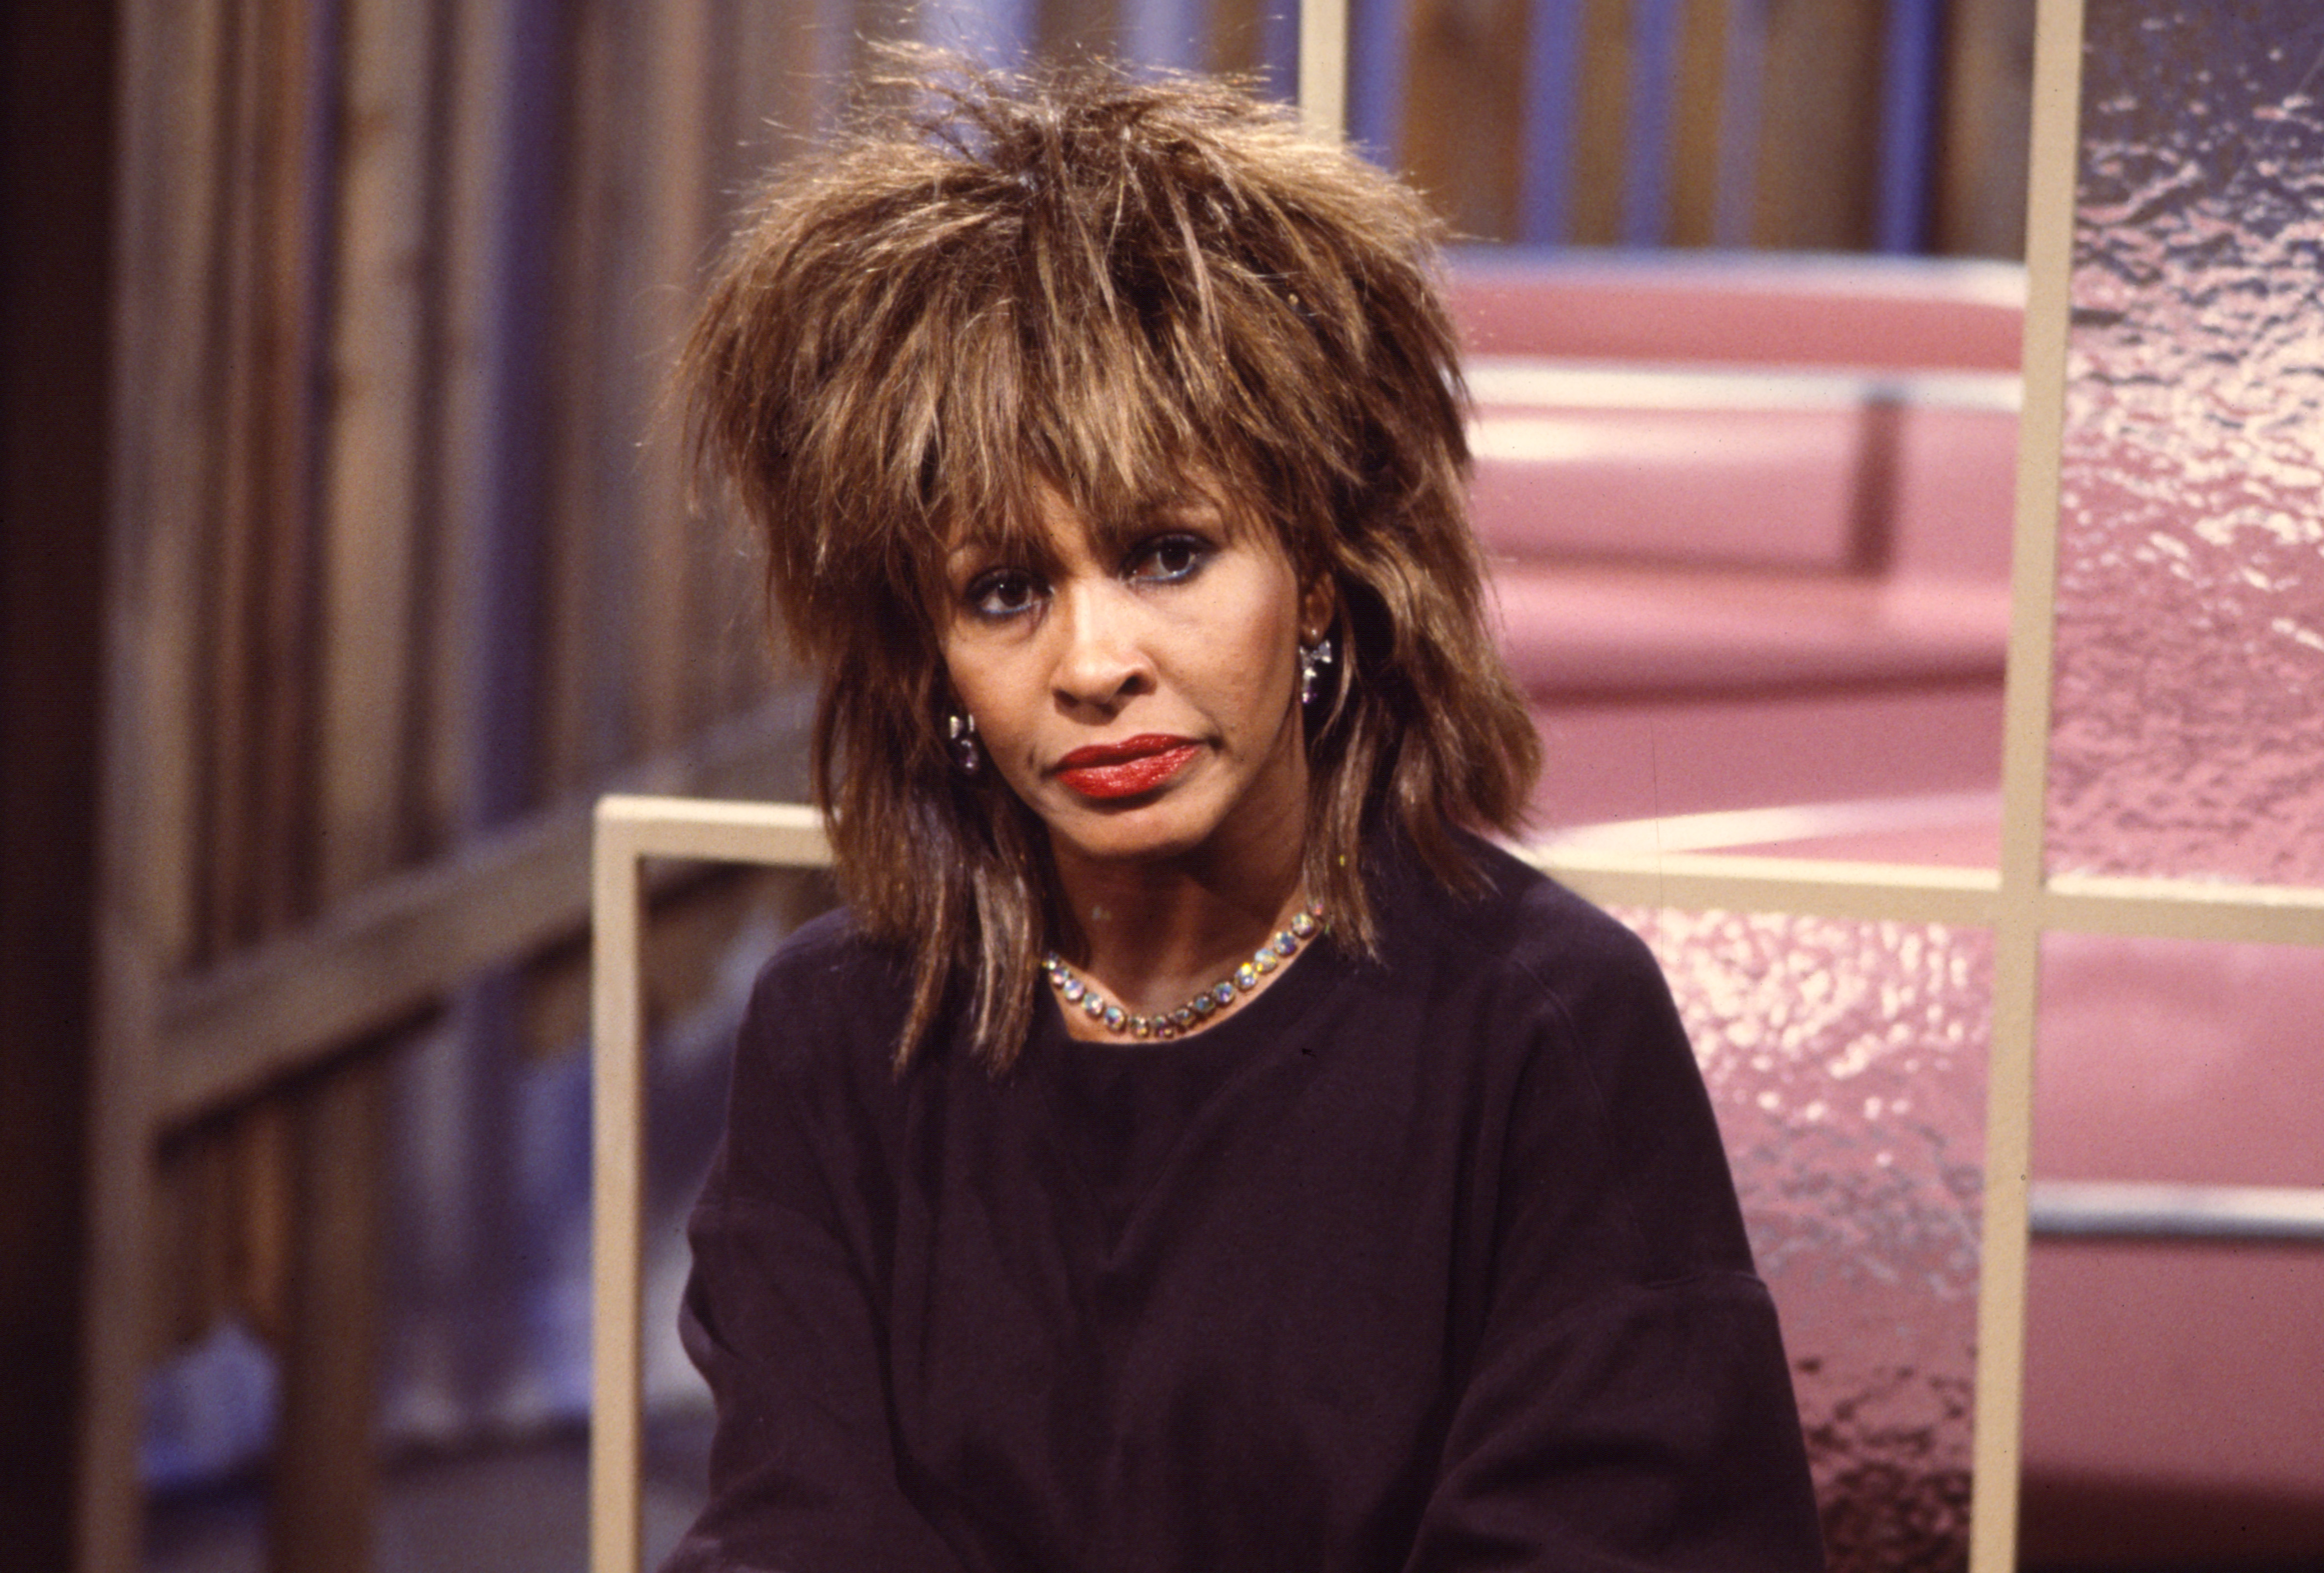 Tina Turner is pictured during an interview on MTV at Teletronic Studios on August 22, 1984, New York City | Source: Getty Images